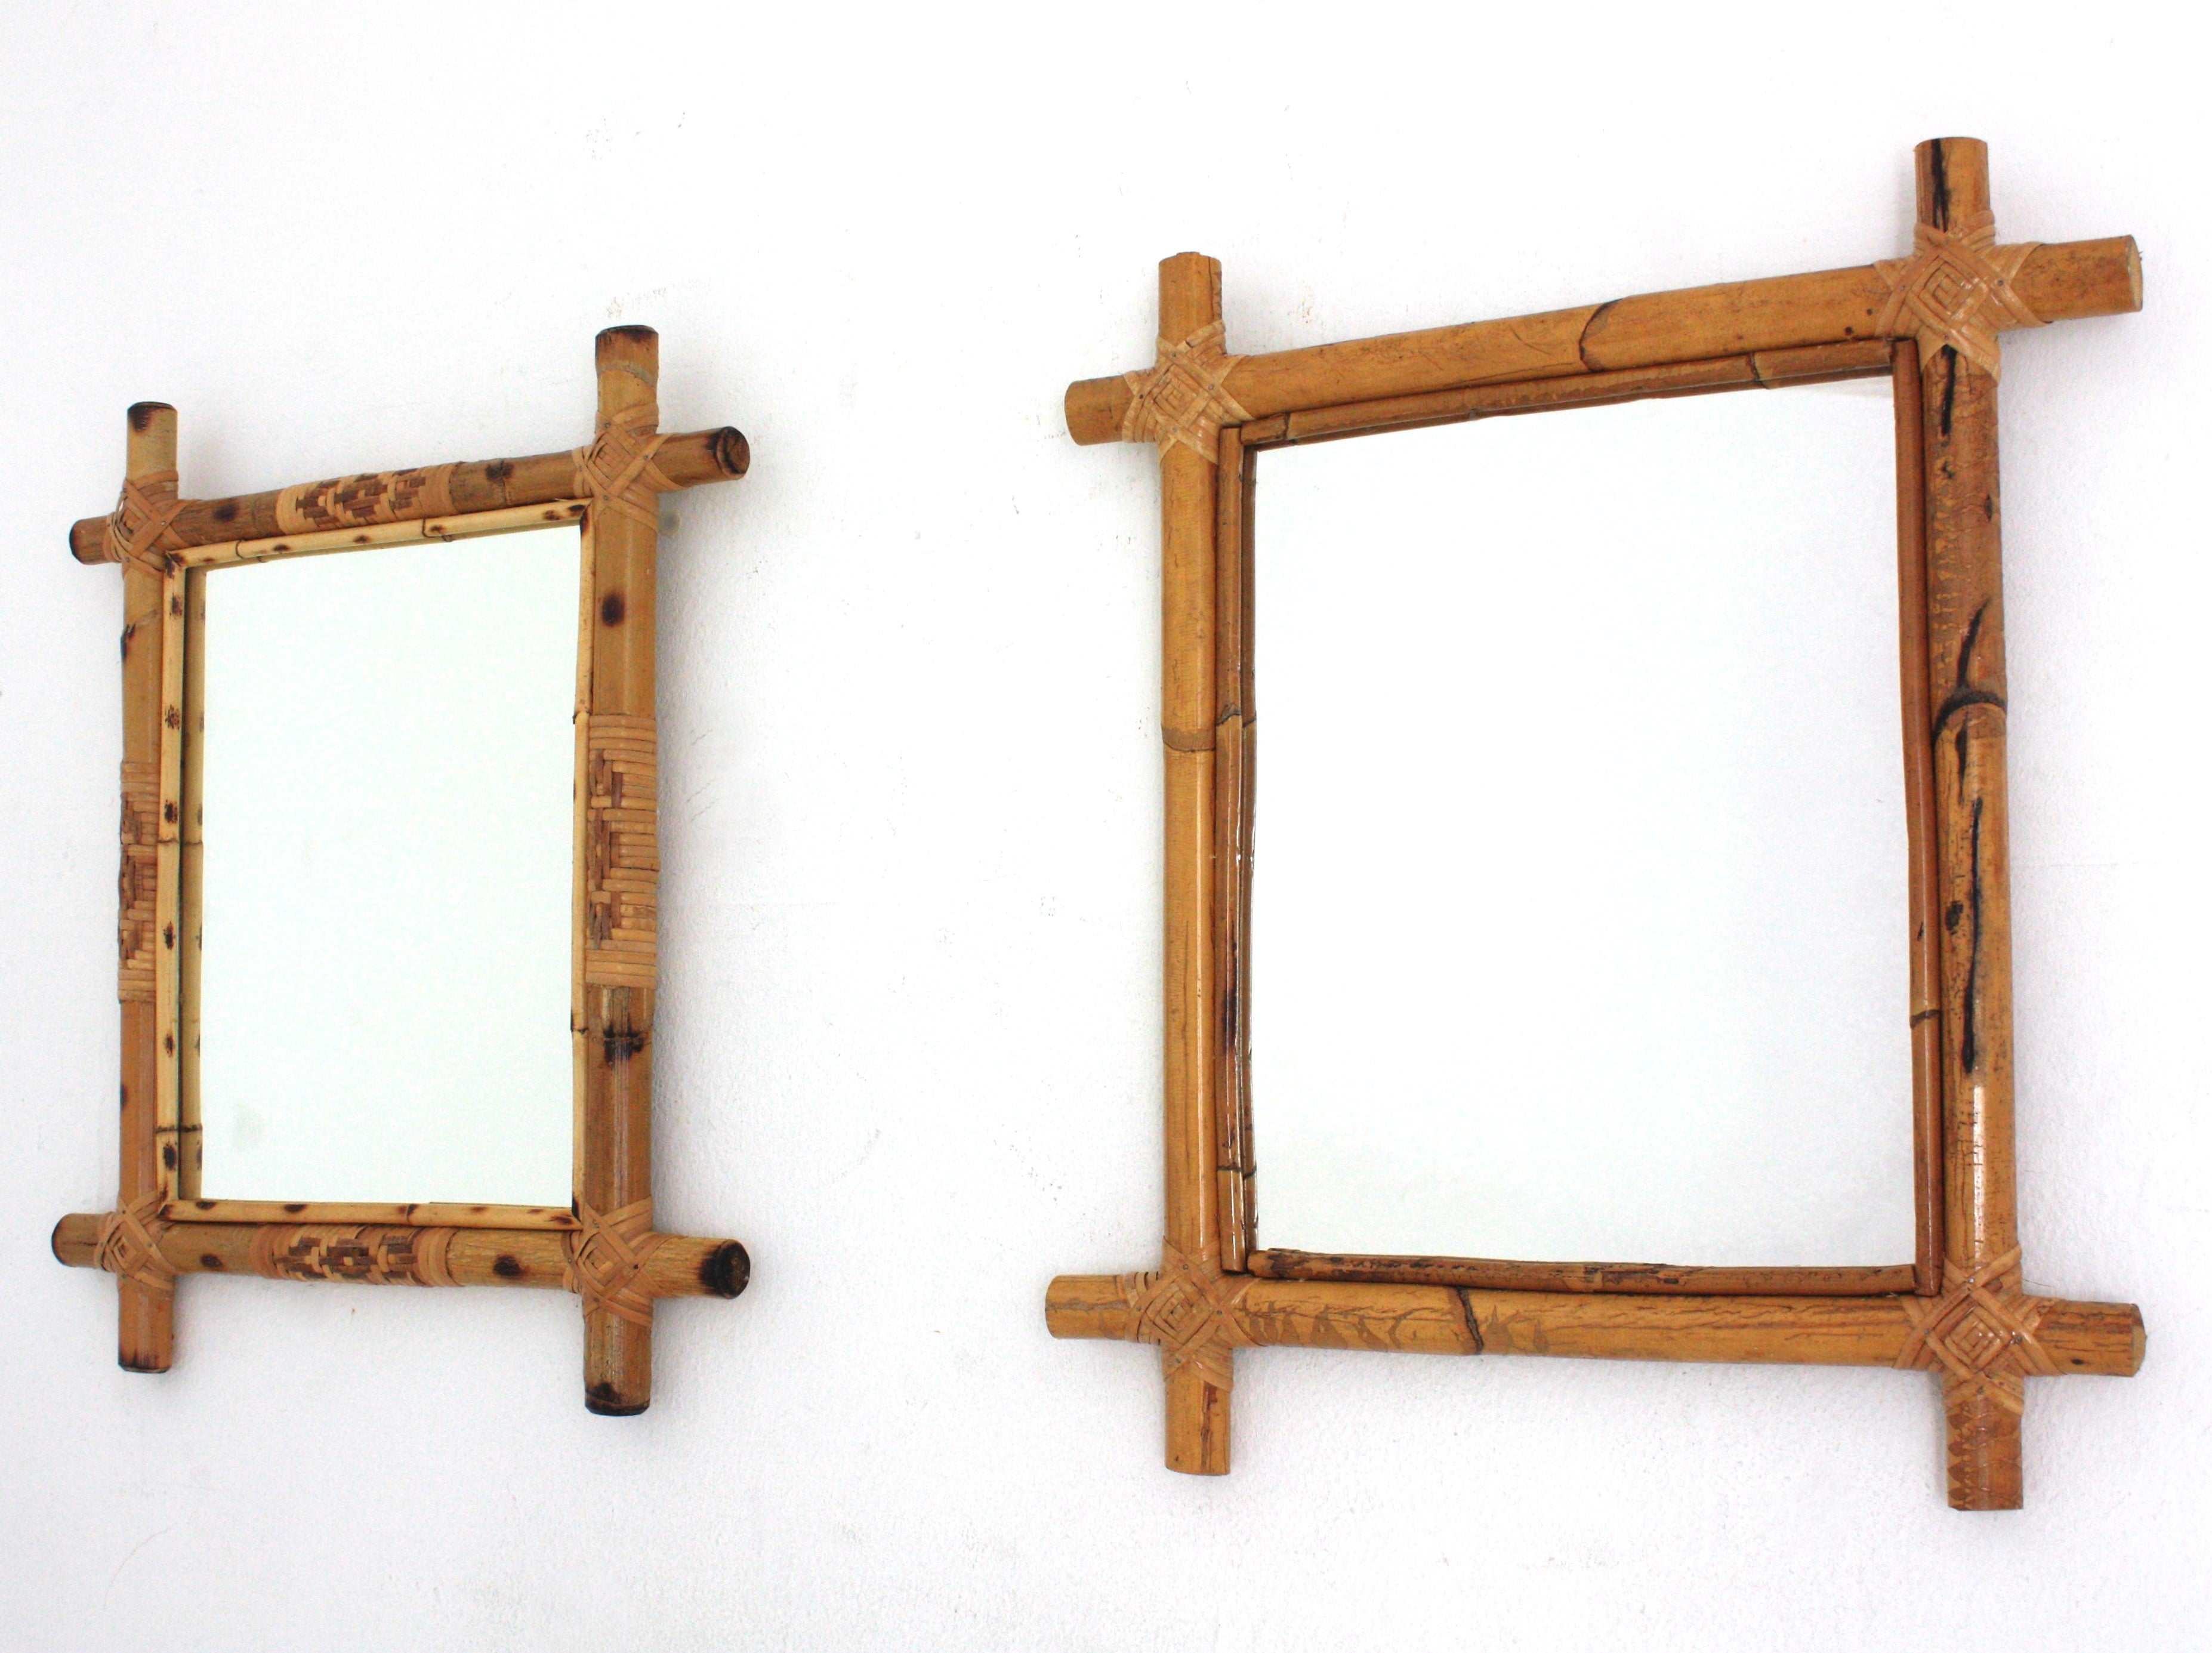 Unmatching Pair of Rectangular wall mirrors, bamboo, rattan
Eye-catching rectangular mirrors handcrafted with bamboo/ rattan cane. Spain, 1960s.
Rectangular mirrors made of rattan with crossed corners frames.
Inspired in JM Frank designs
They have a